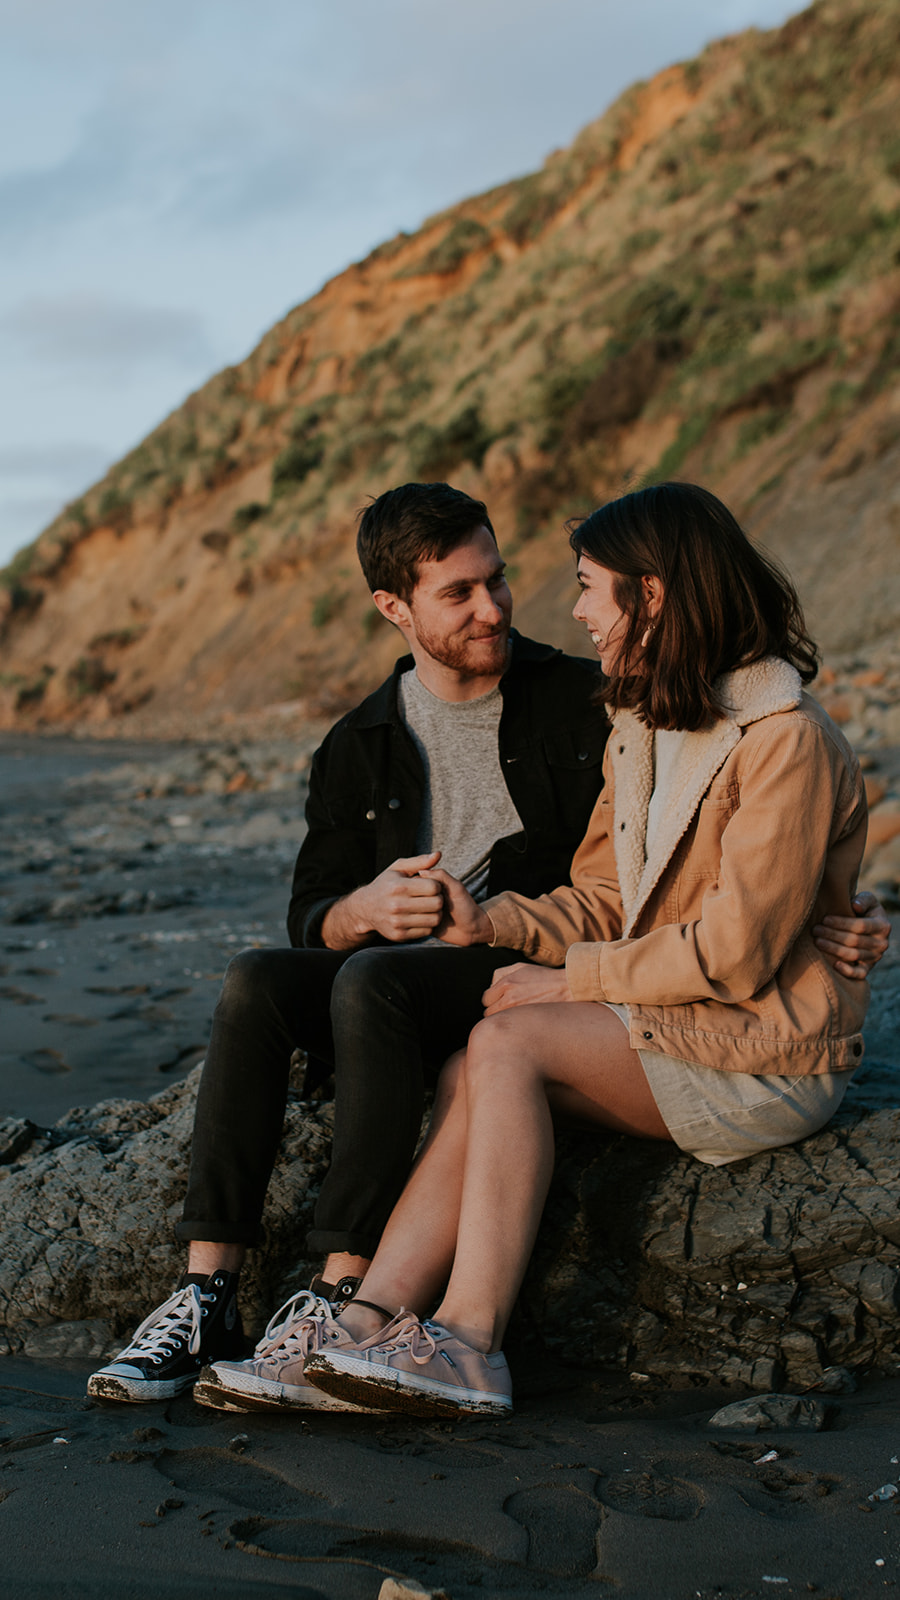 A couple who decided to have their engagement portraits taken at Port Waikato.